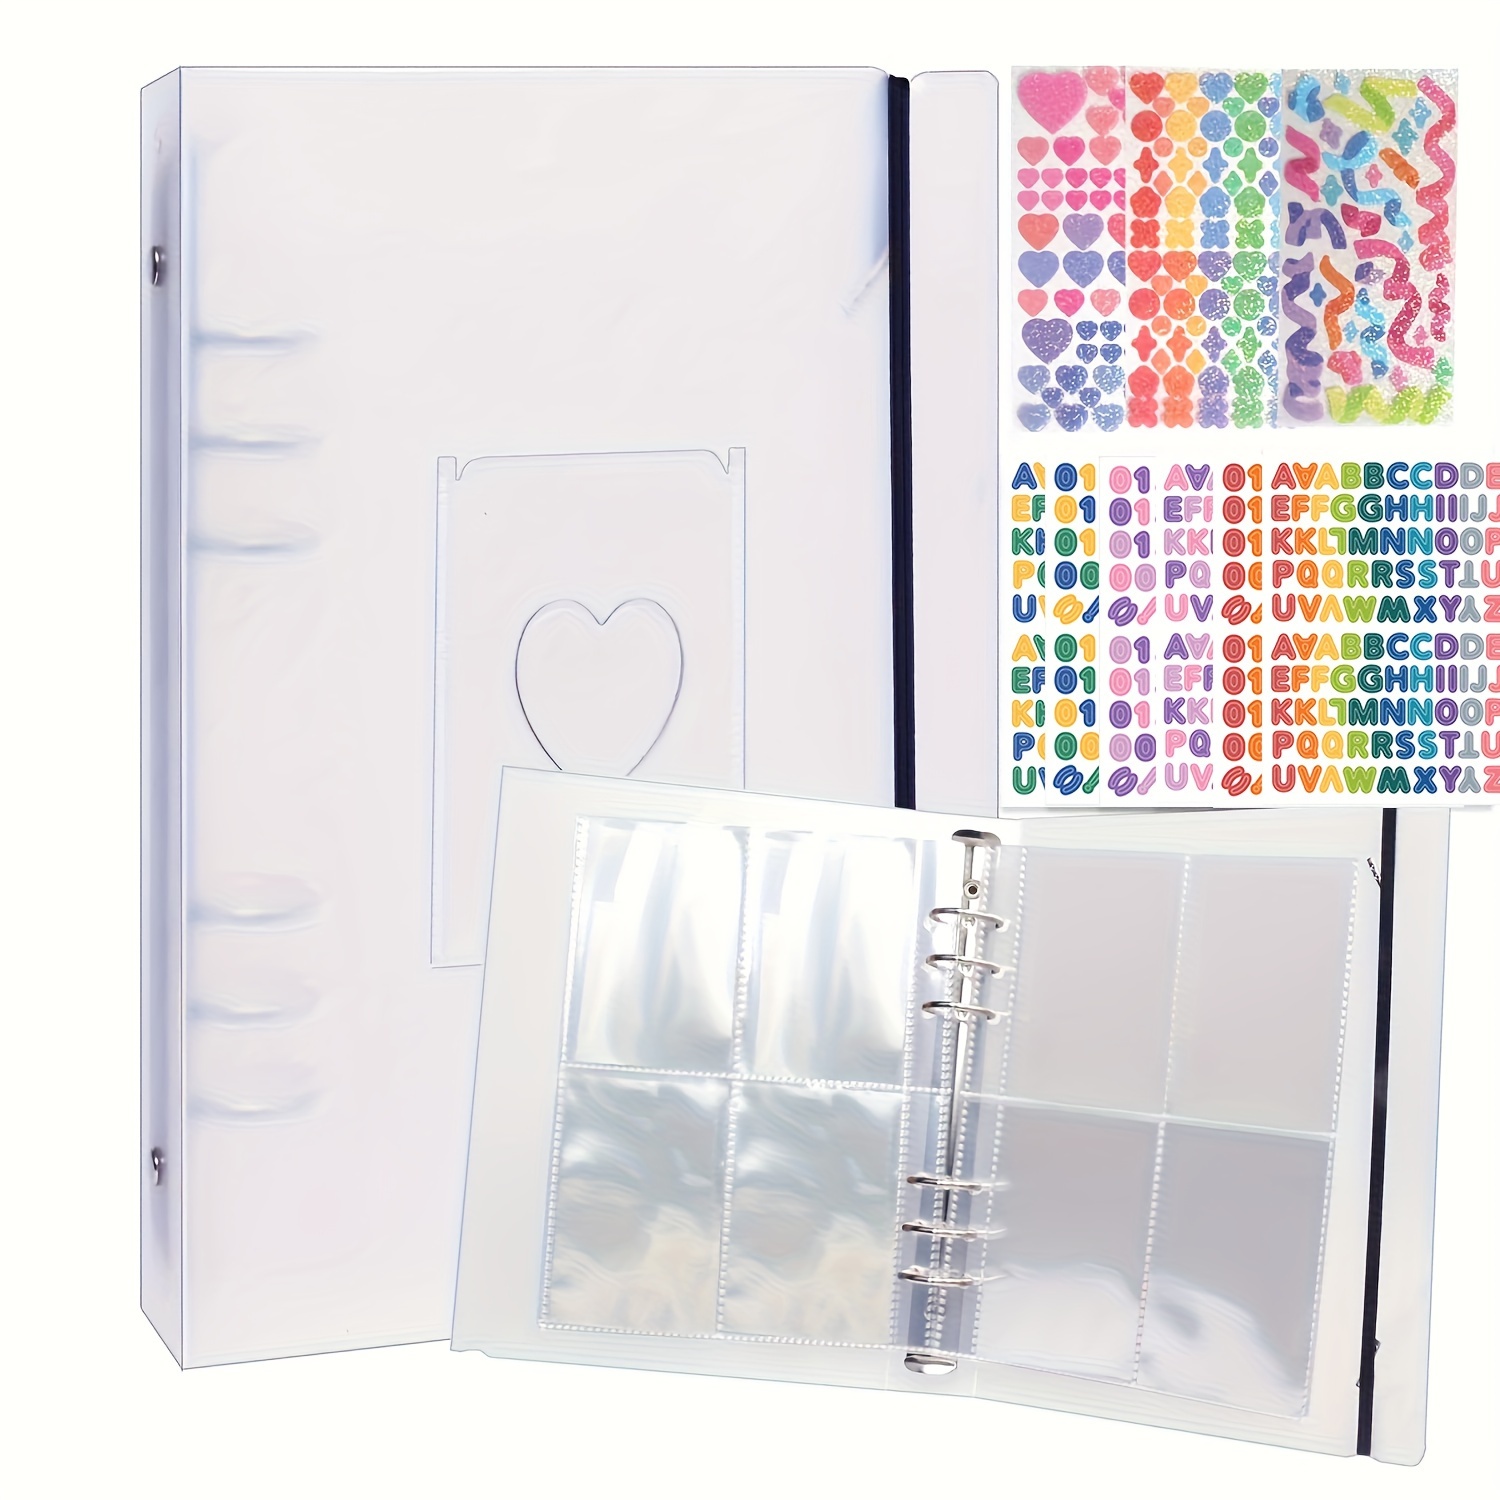 Sticker Collecting Album Reusable Sticker Book 40 Sheets A4/A5 PU Leather  Cover for Scrapbook, Yellow 